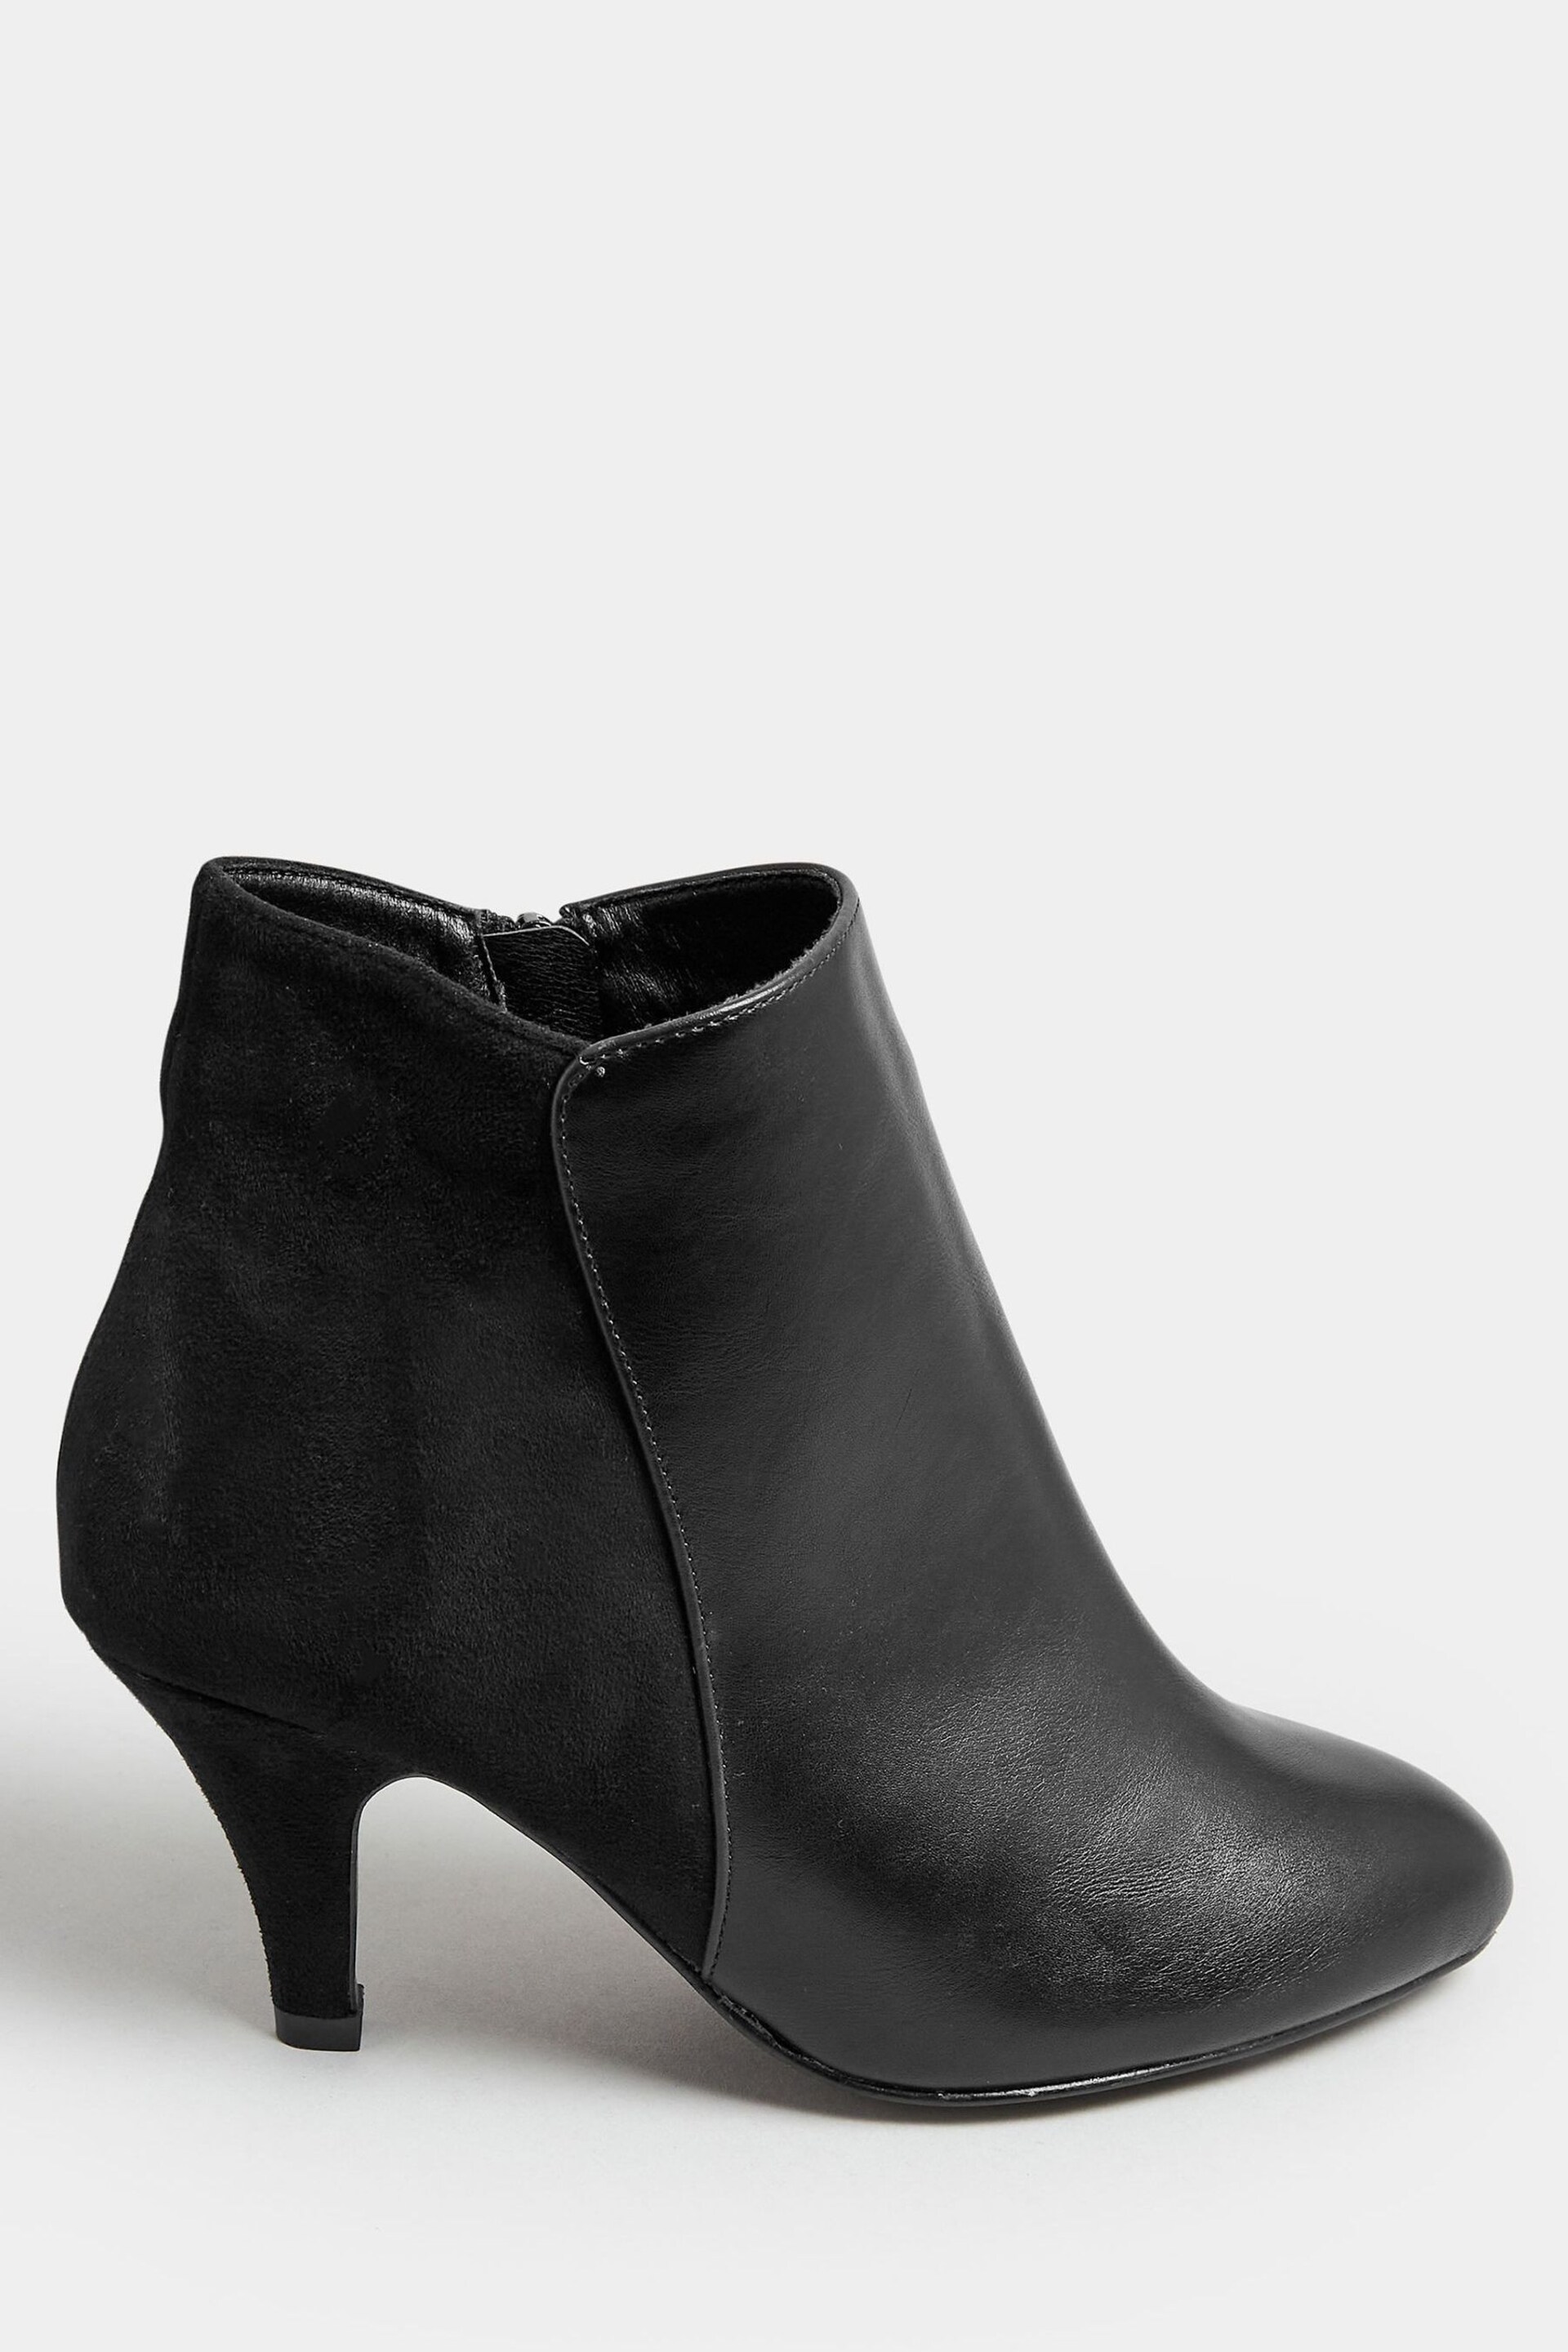 Yours Curve Black Extra Wide Fit Shoes Boots - Image 2 of 5